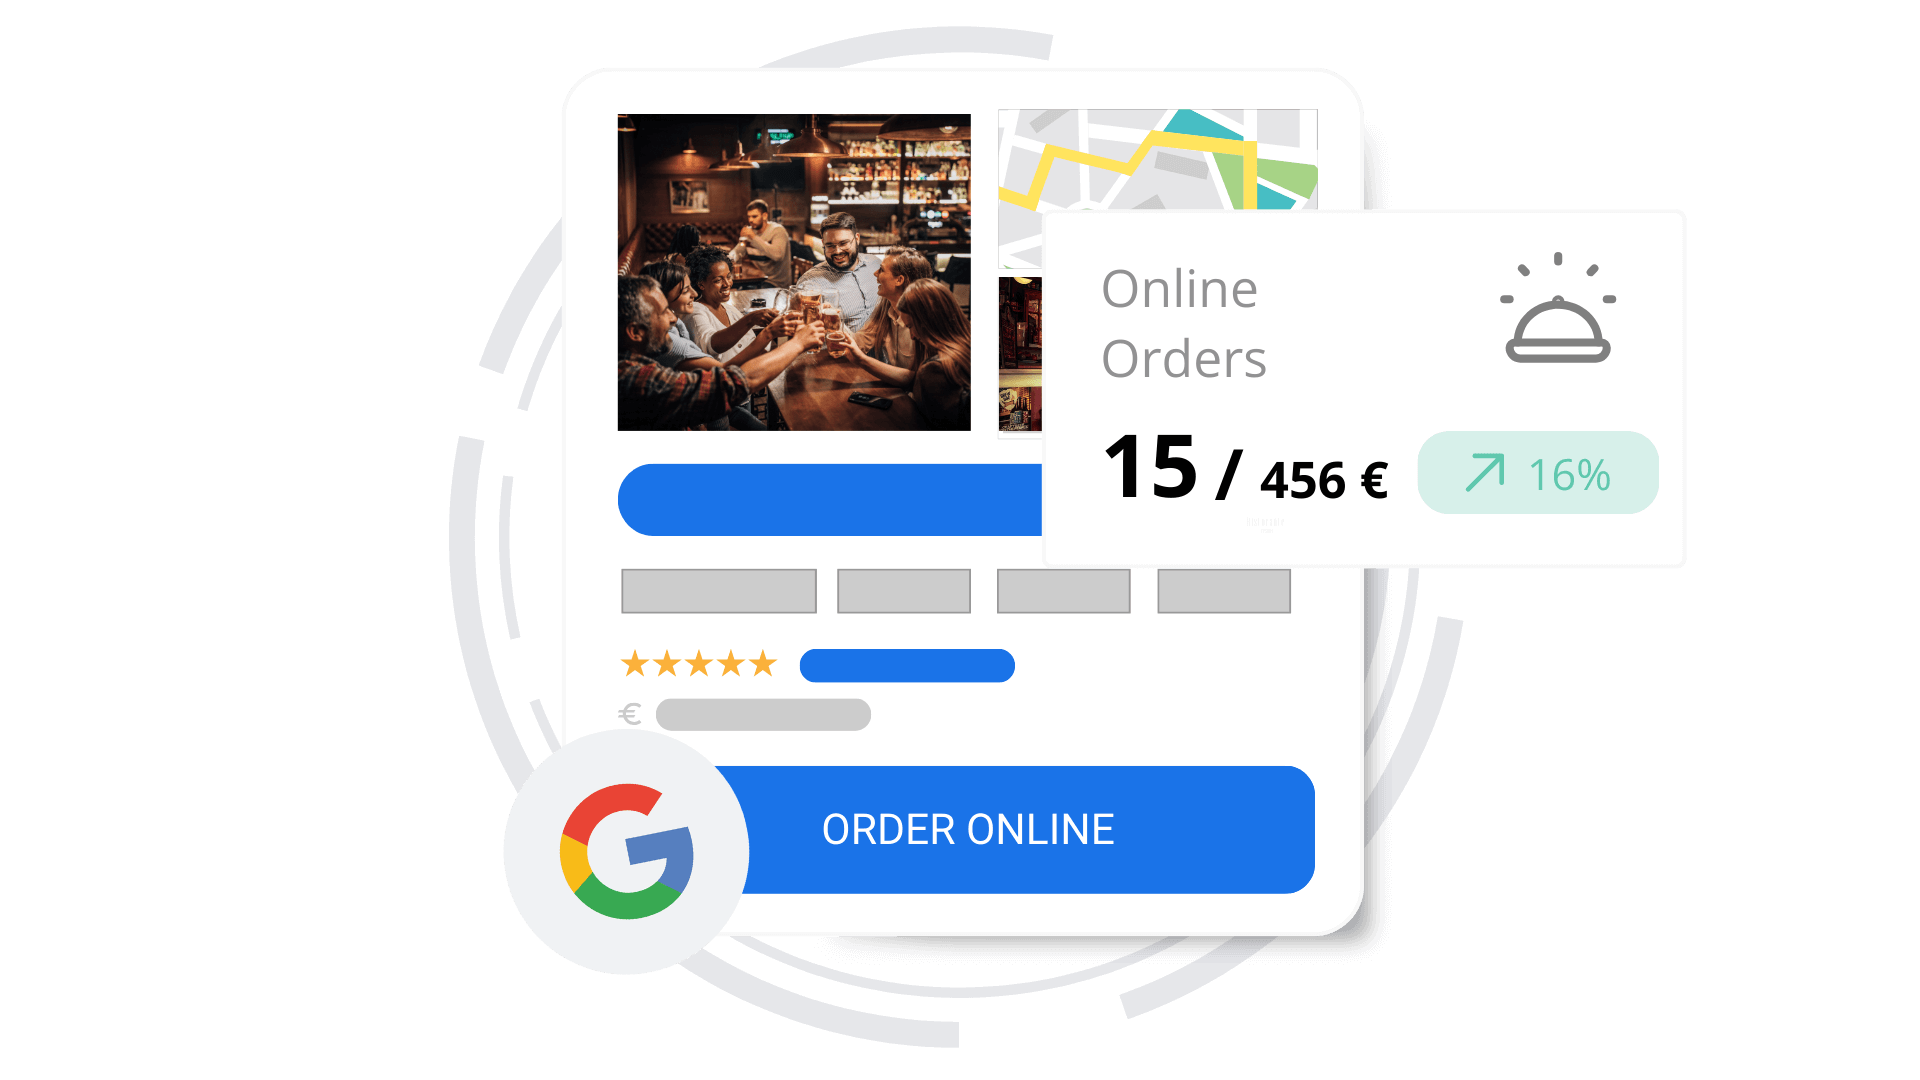 Google Food Ordering boosts growth